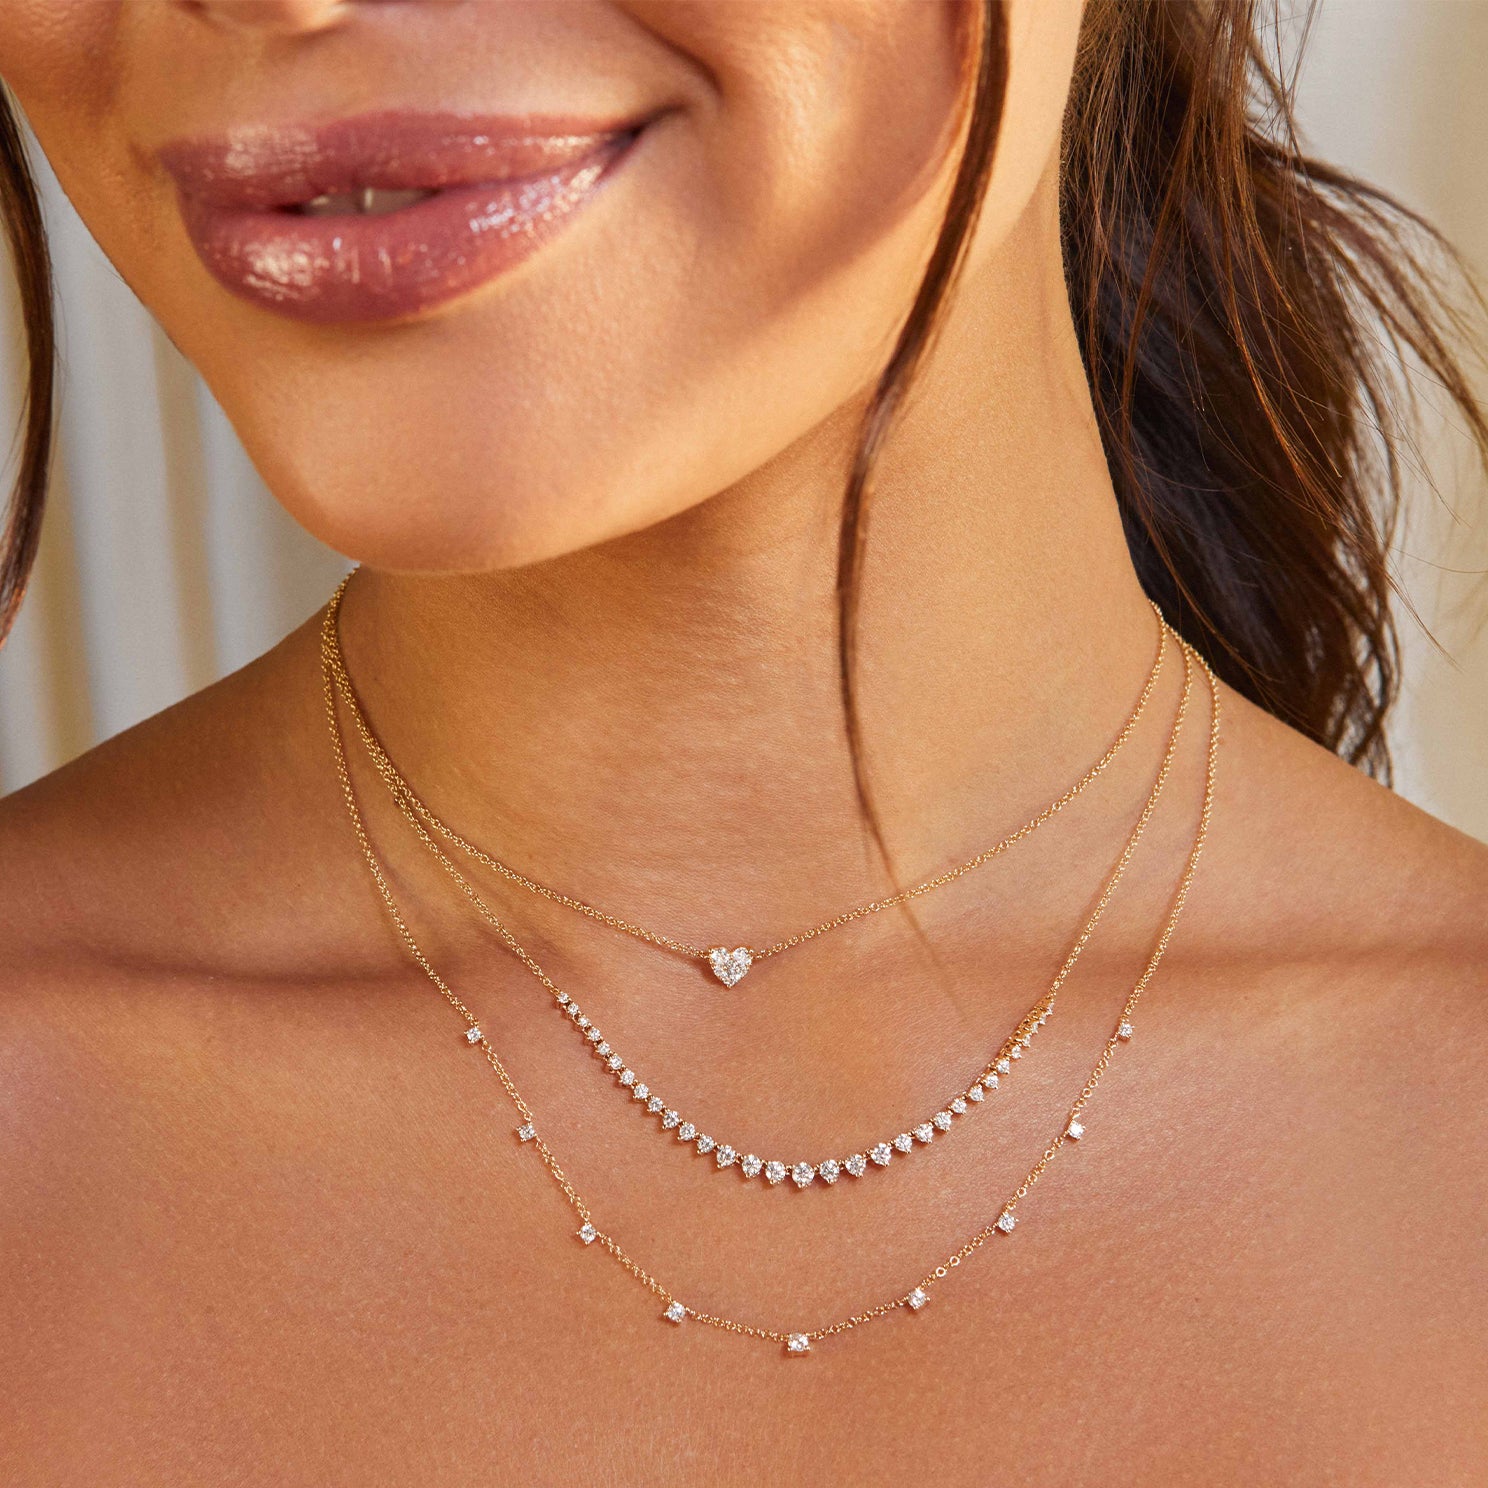 Graduated Diamond Necklace in 14k yellow gold styled on neck of model with full cut heart necklace and 9 prong diamond necklace